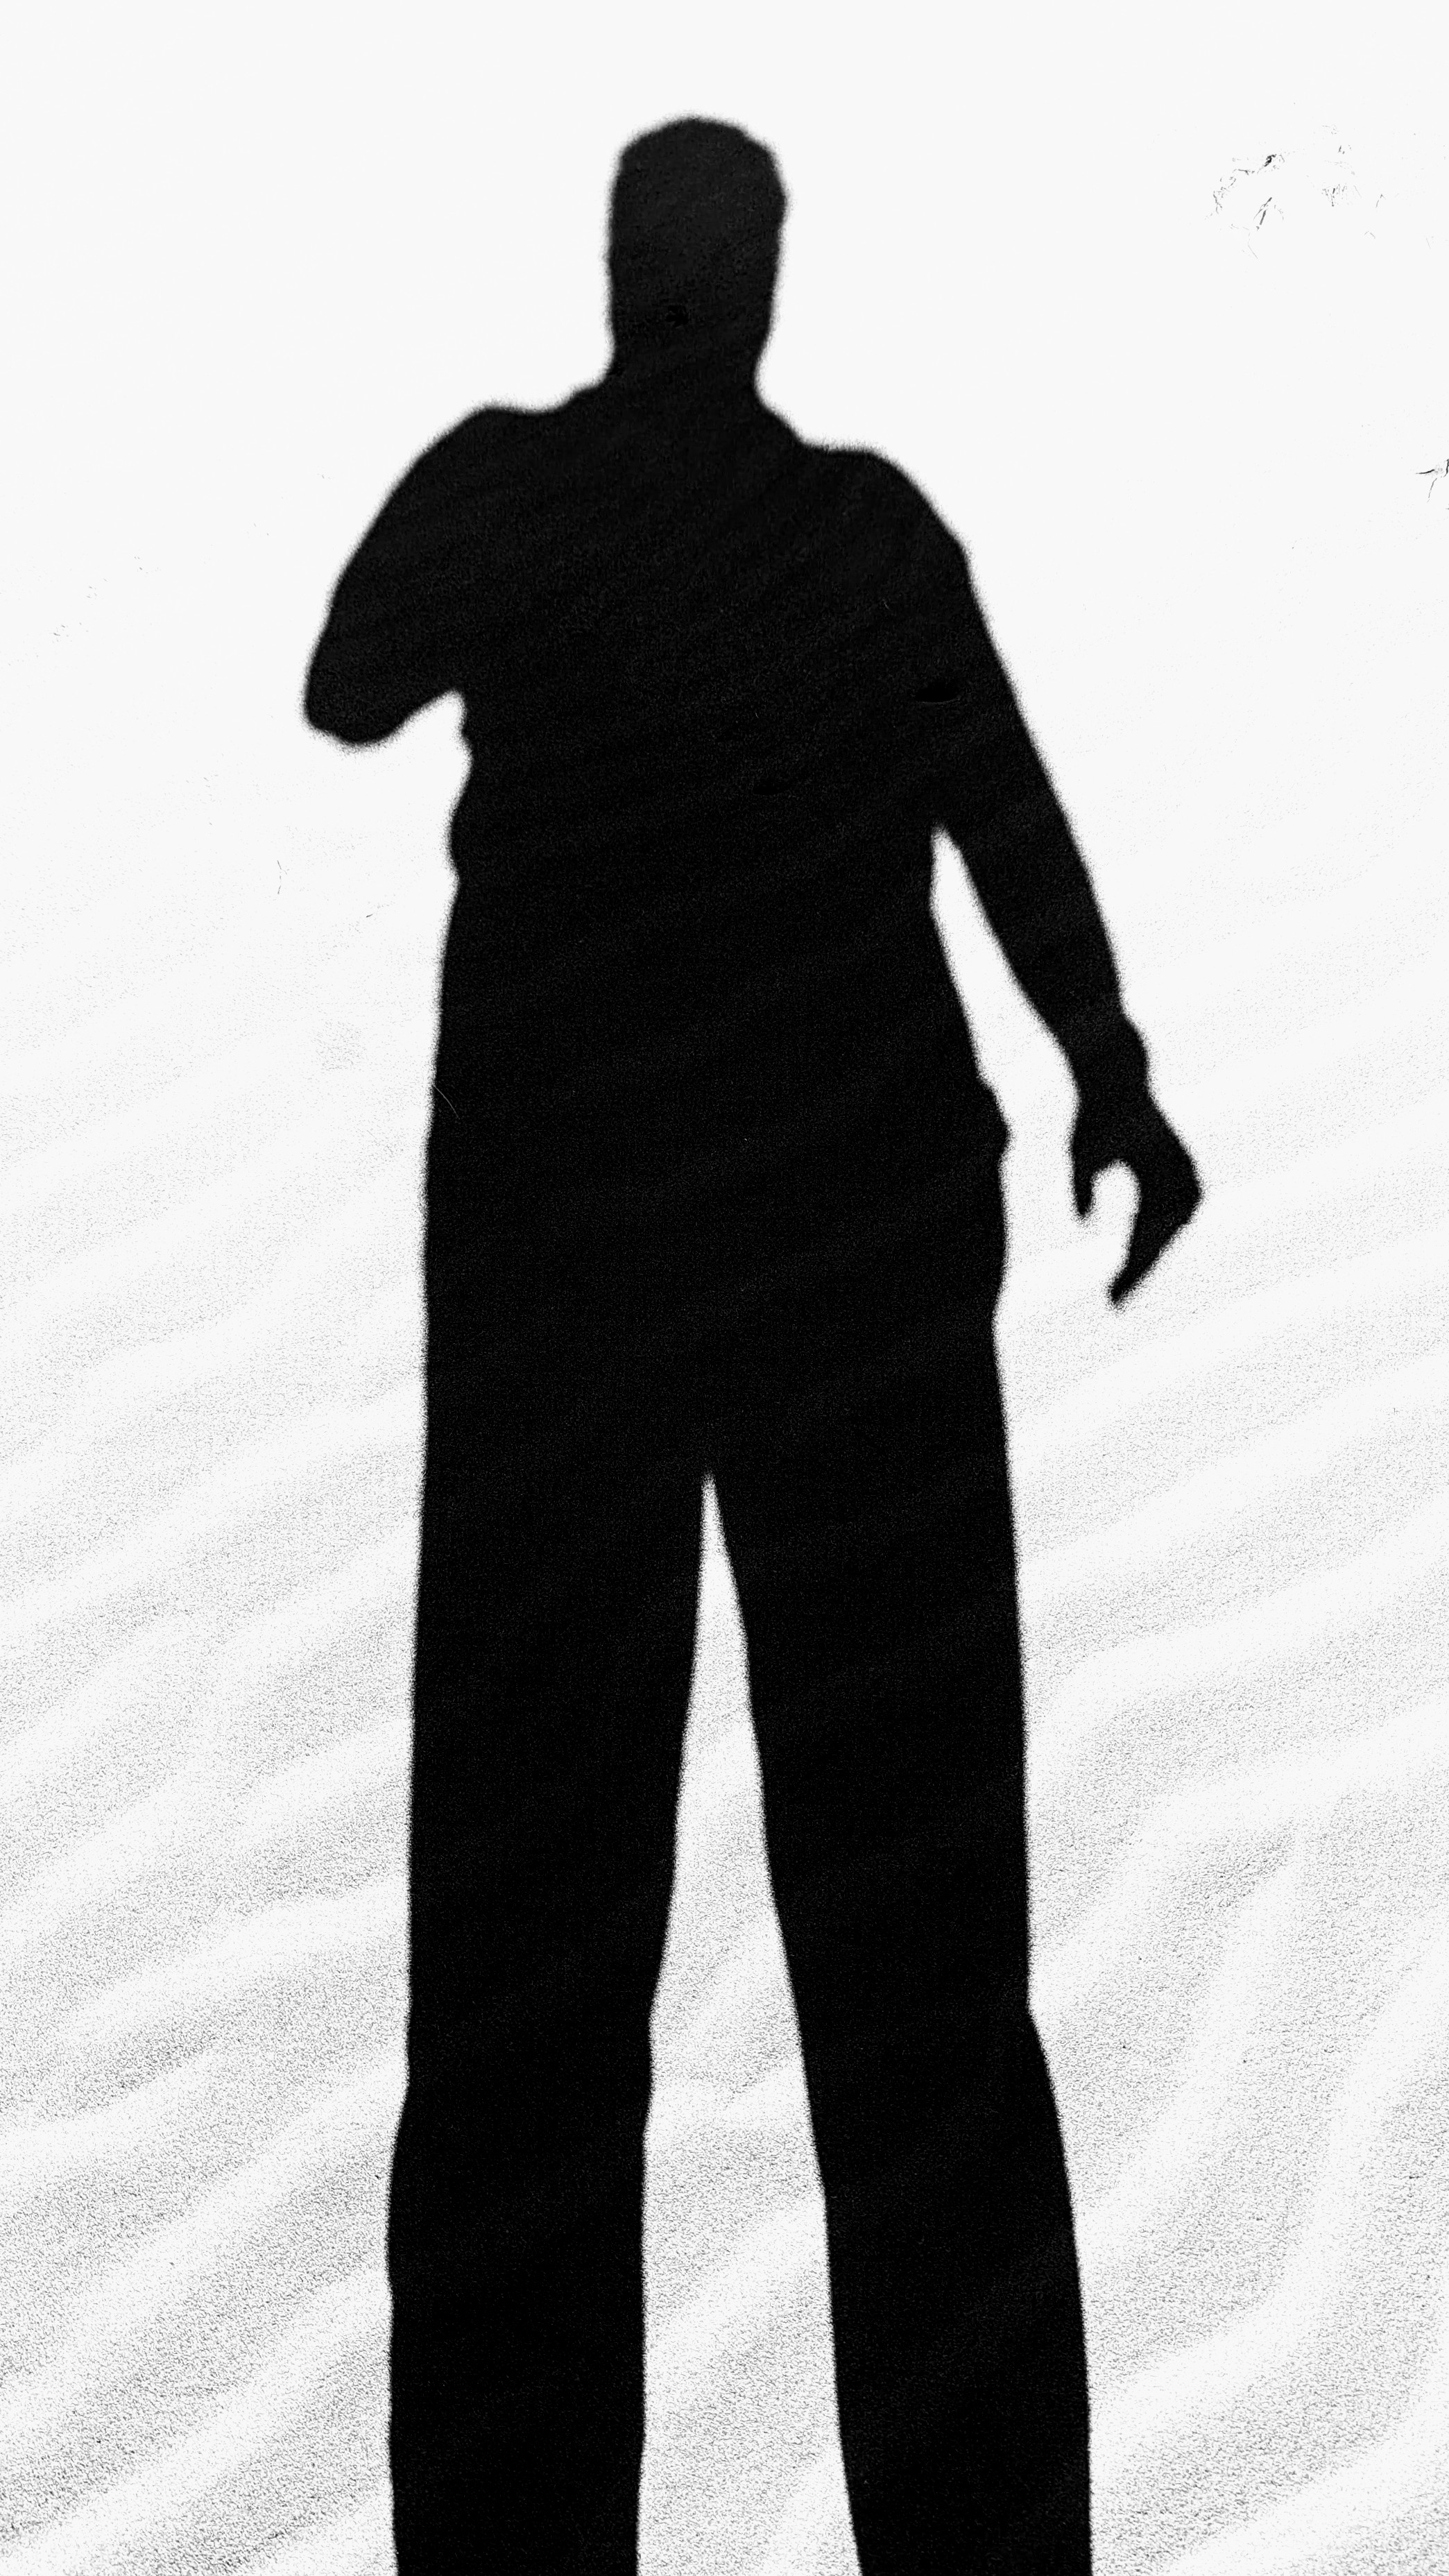 Edited and with stark contrast this photo shows a selfie shadow of a man on a rippled beach.